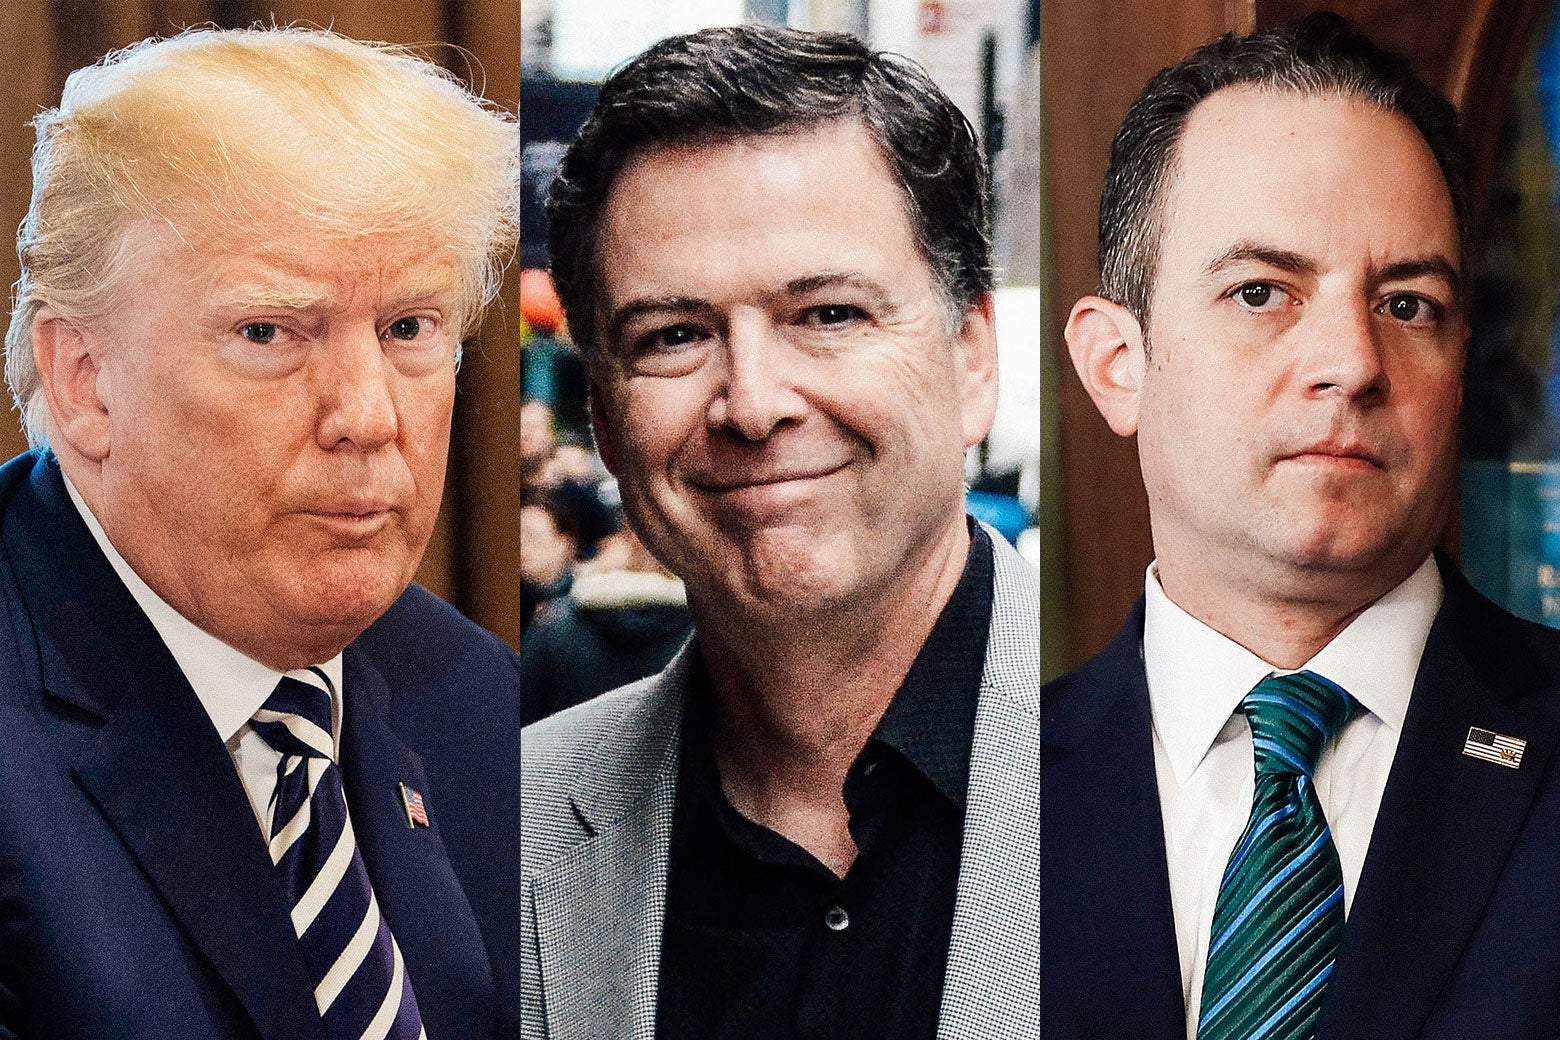 Donald Trump, James Comey, and Reince Priebus side-by-side-by-side.